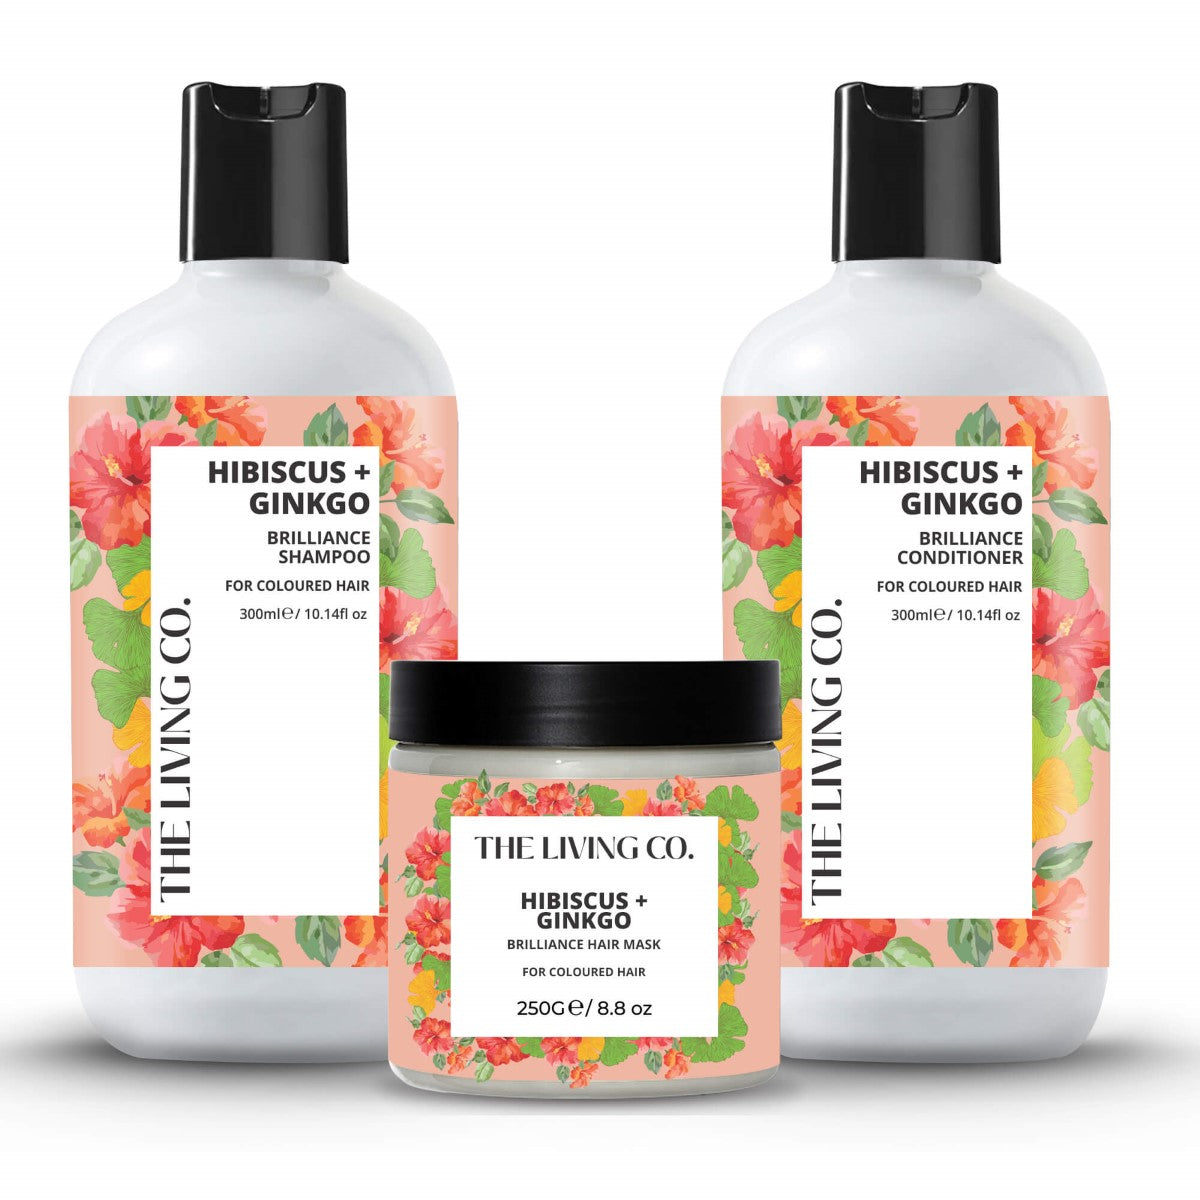 Brilliance Hair Care Kit With Hibiscus + Ginkgo